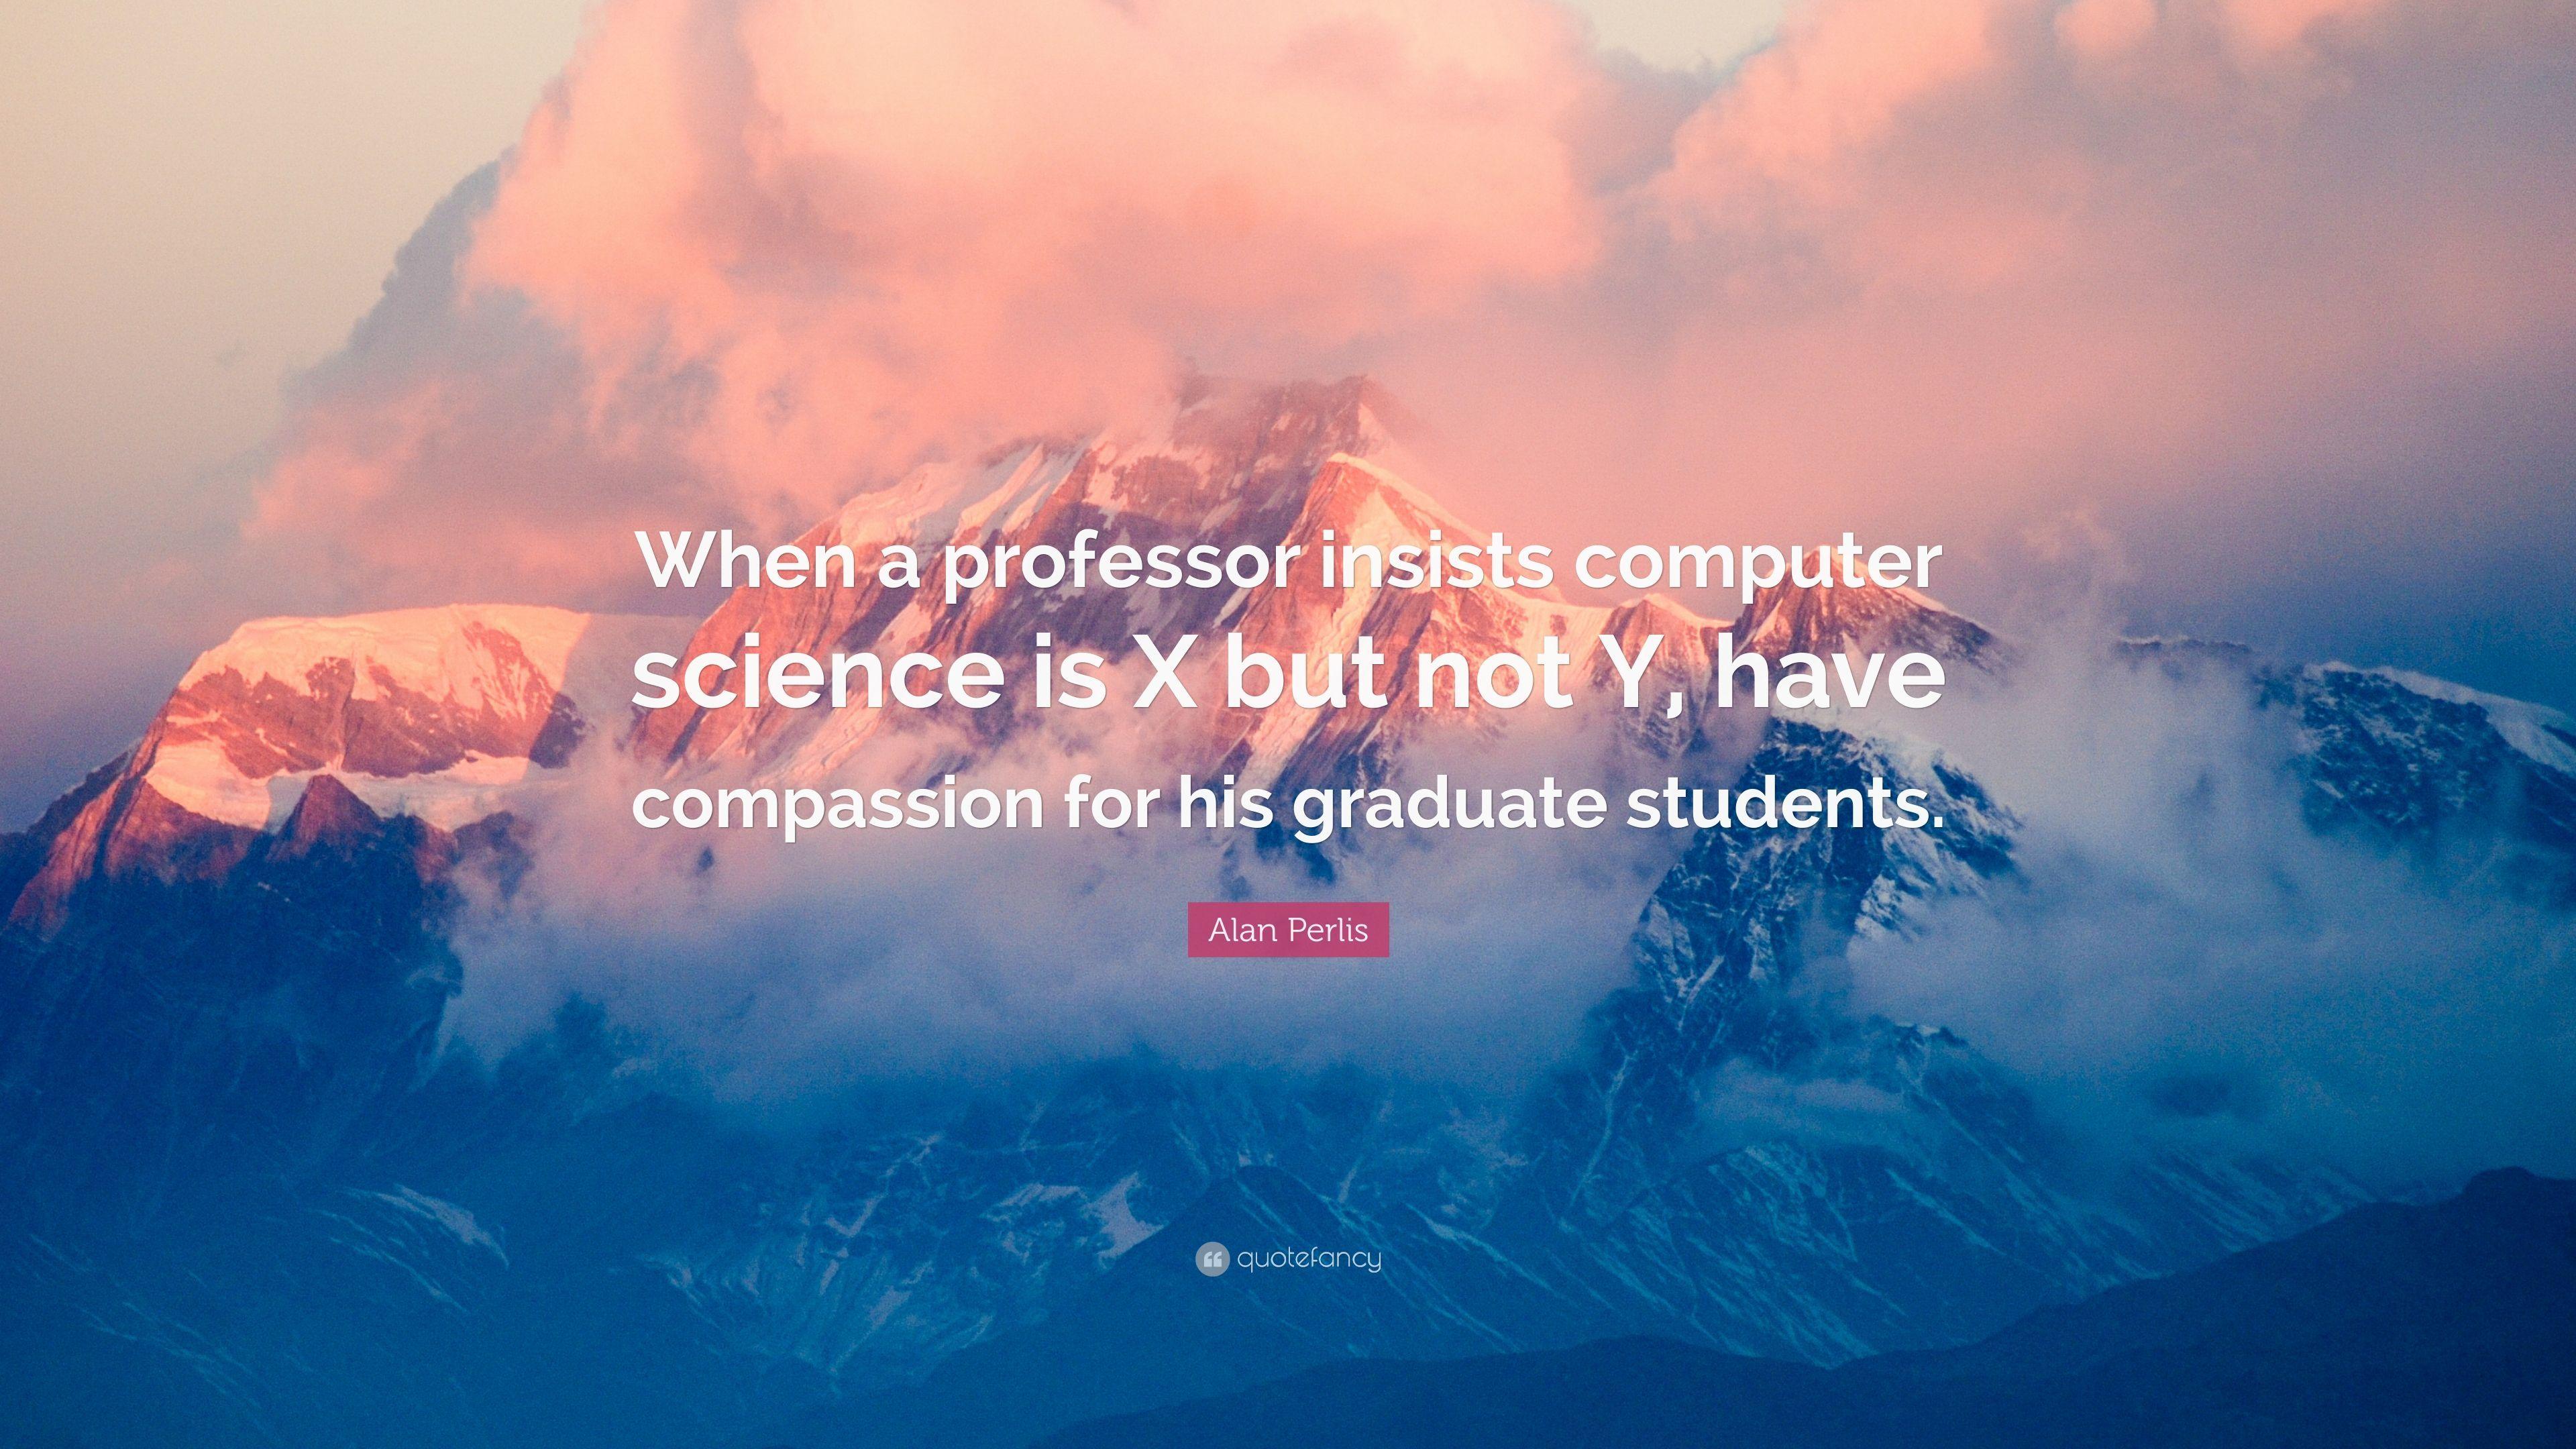 Alan Perlis Quote: “When a professor insists computer science is X